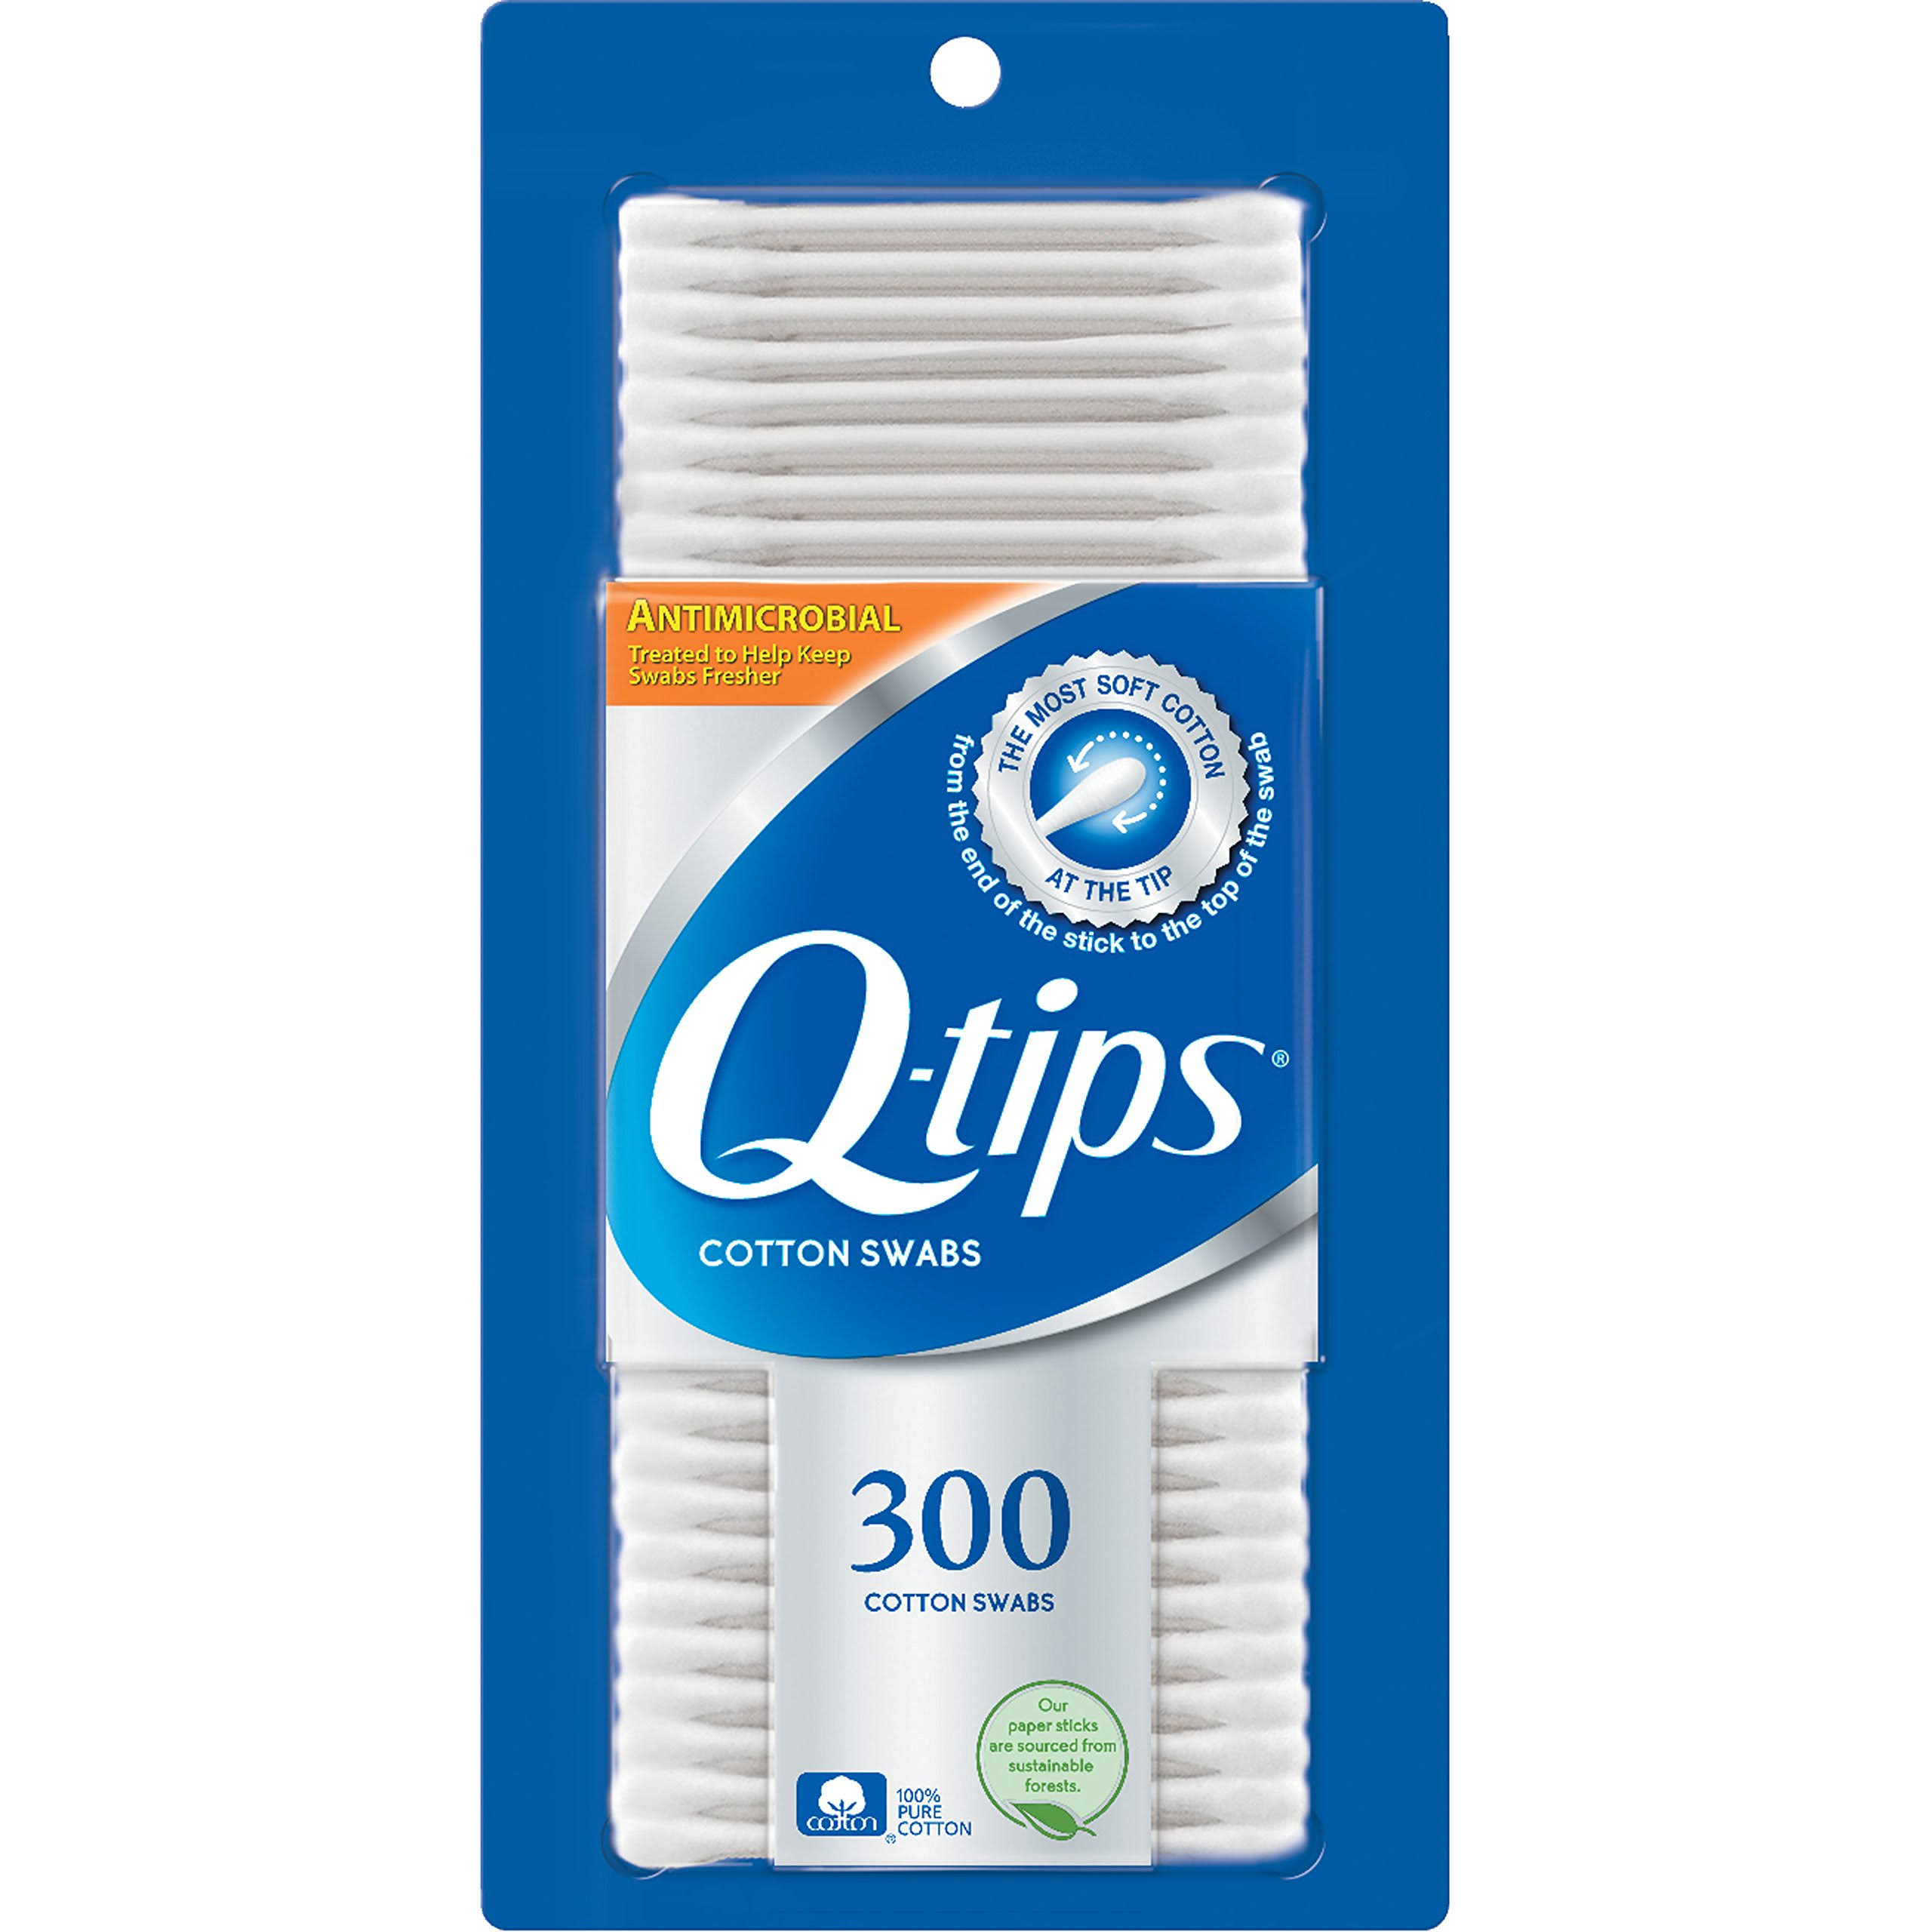 Q Tips Anti Microbial Cotton Swabs - 300 Count